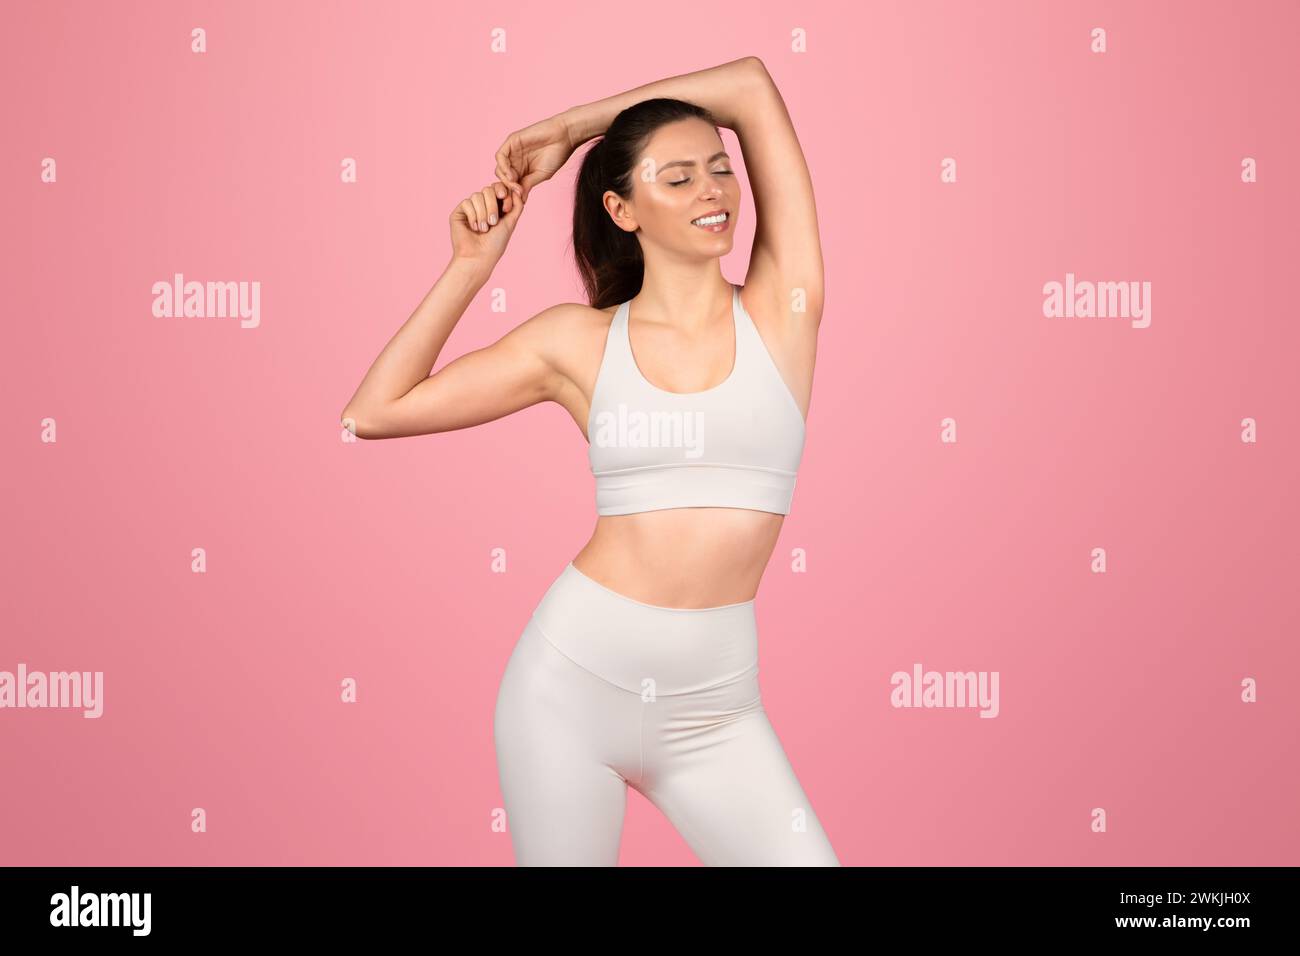 Graceful woman in white athletic apparel enjoying a stretch, eyes closed with a contented smile Stock Photo